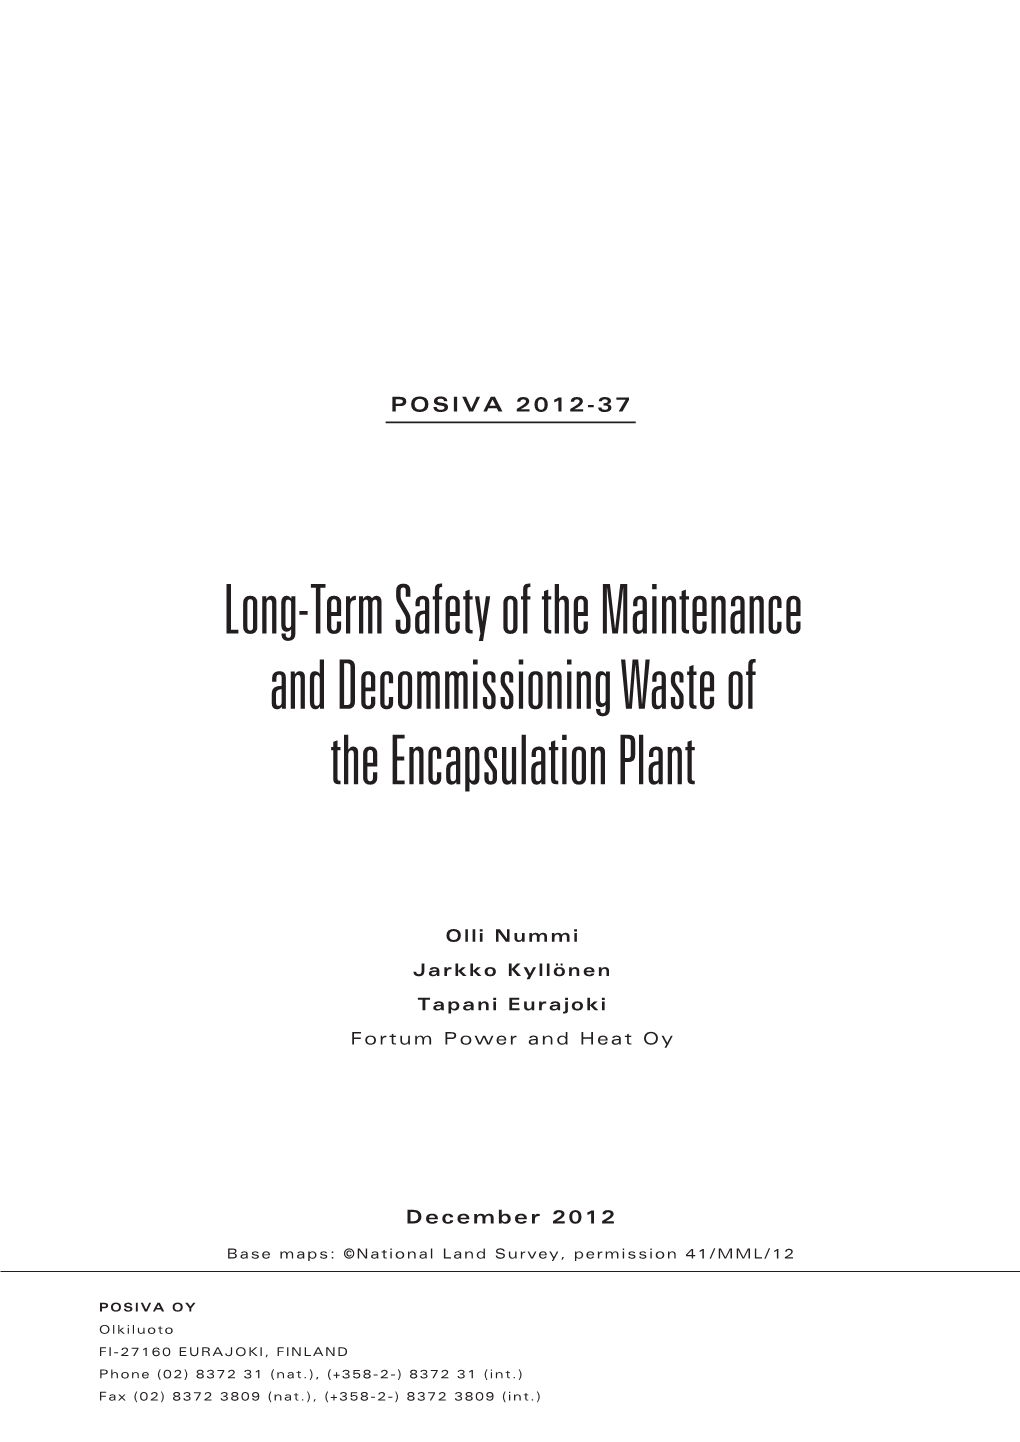 Long-Term Safety of the Maintenance and Decommissioning Waste of the Encapsulation Plant